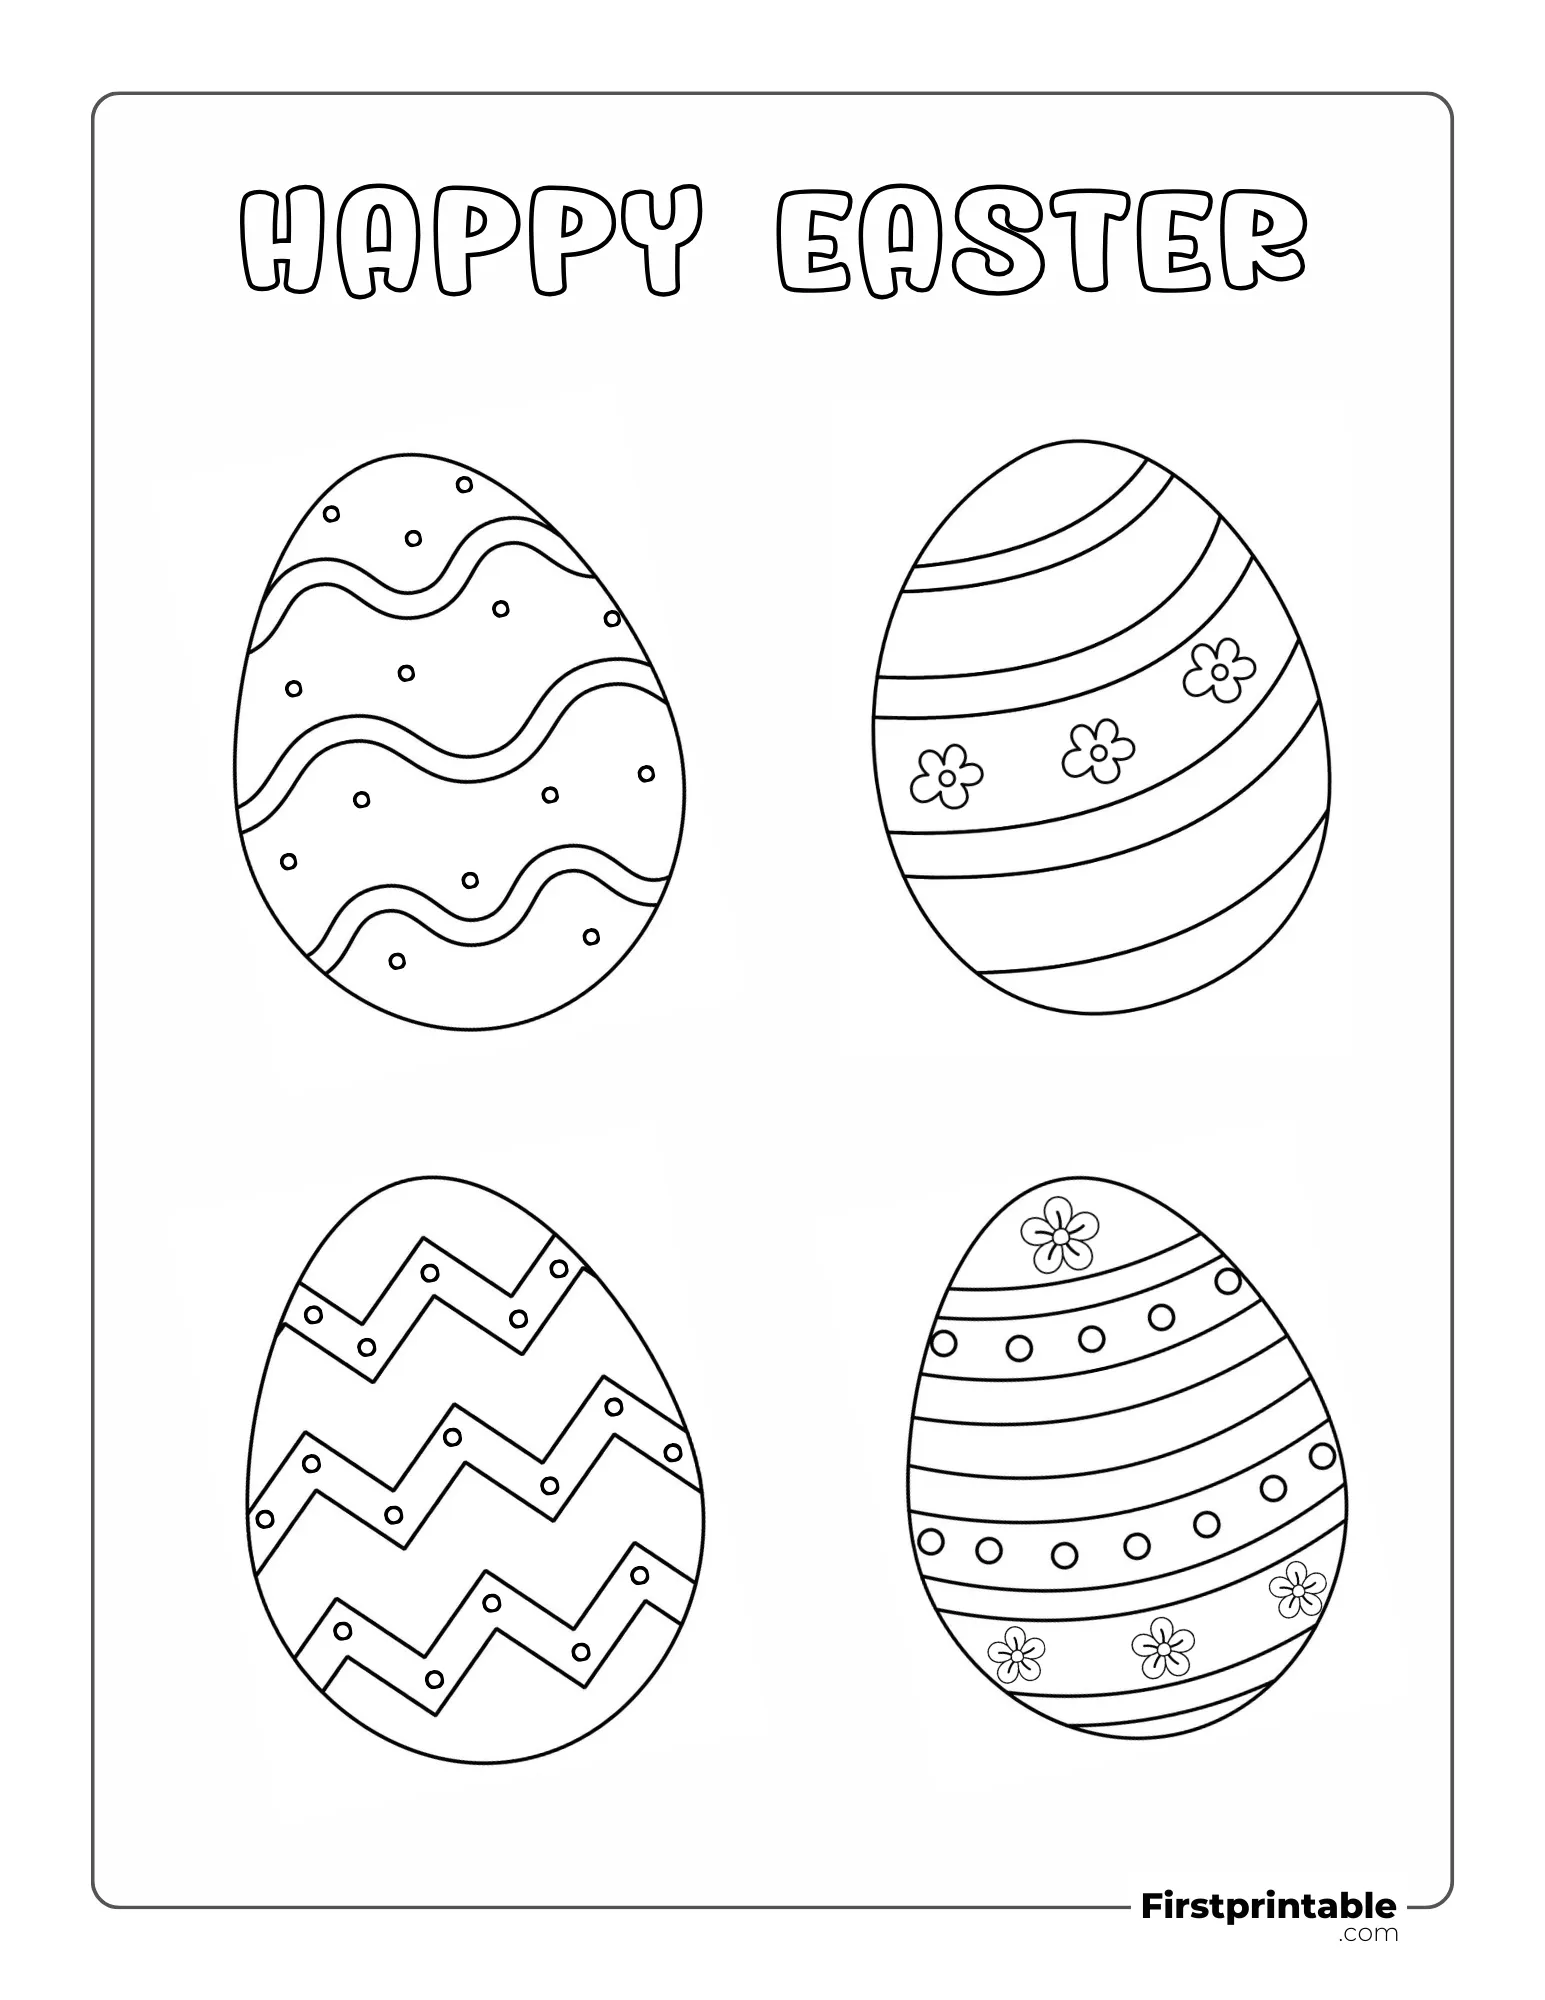 Patterned Easter Eggs Coloring Sheet